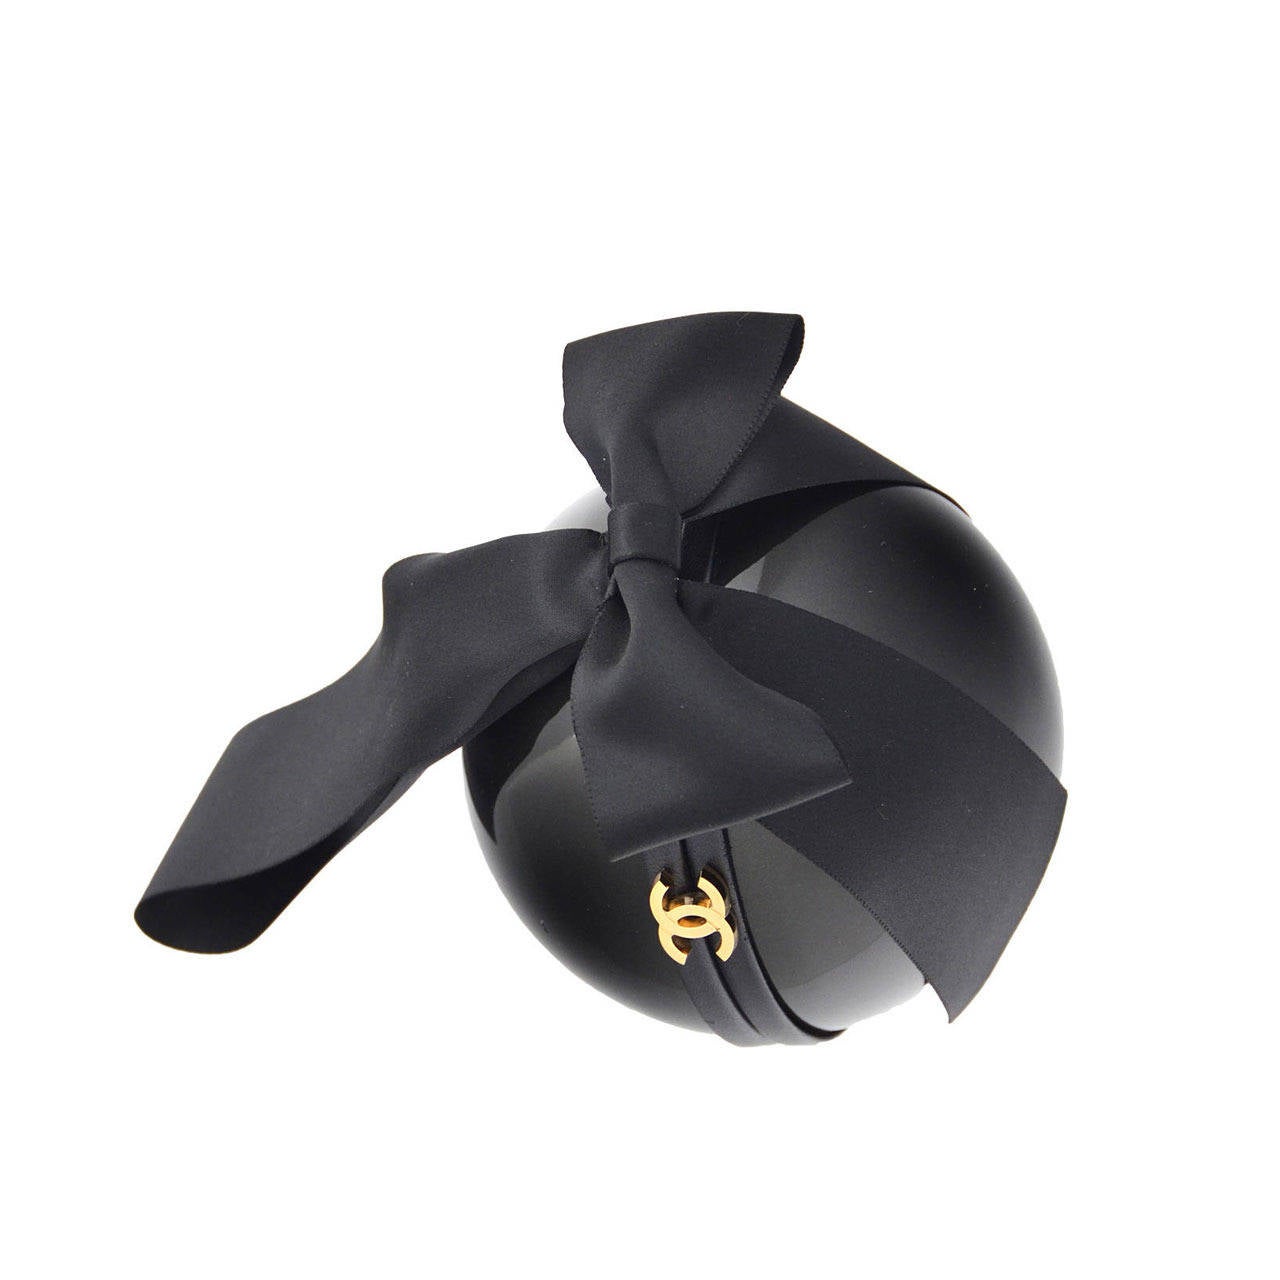 Chanel Giant Black Pearl  With Satin Bow Bag Clutch Runway